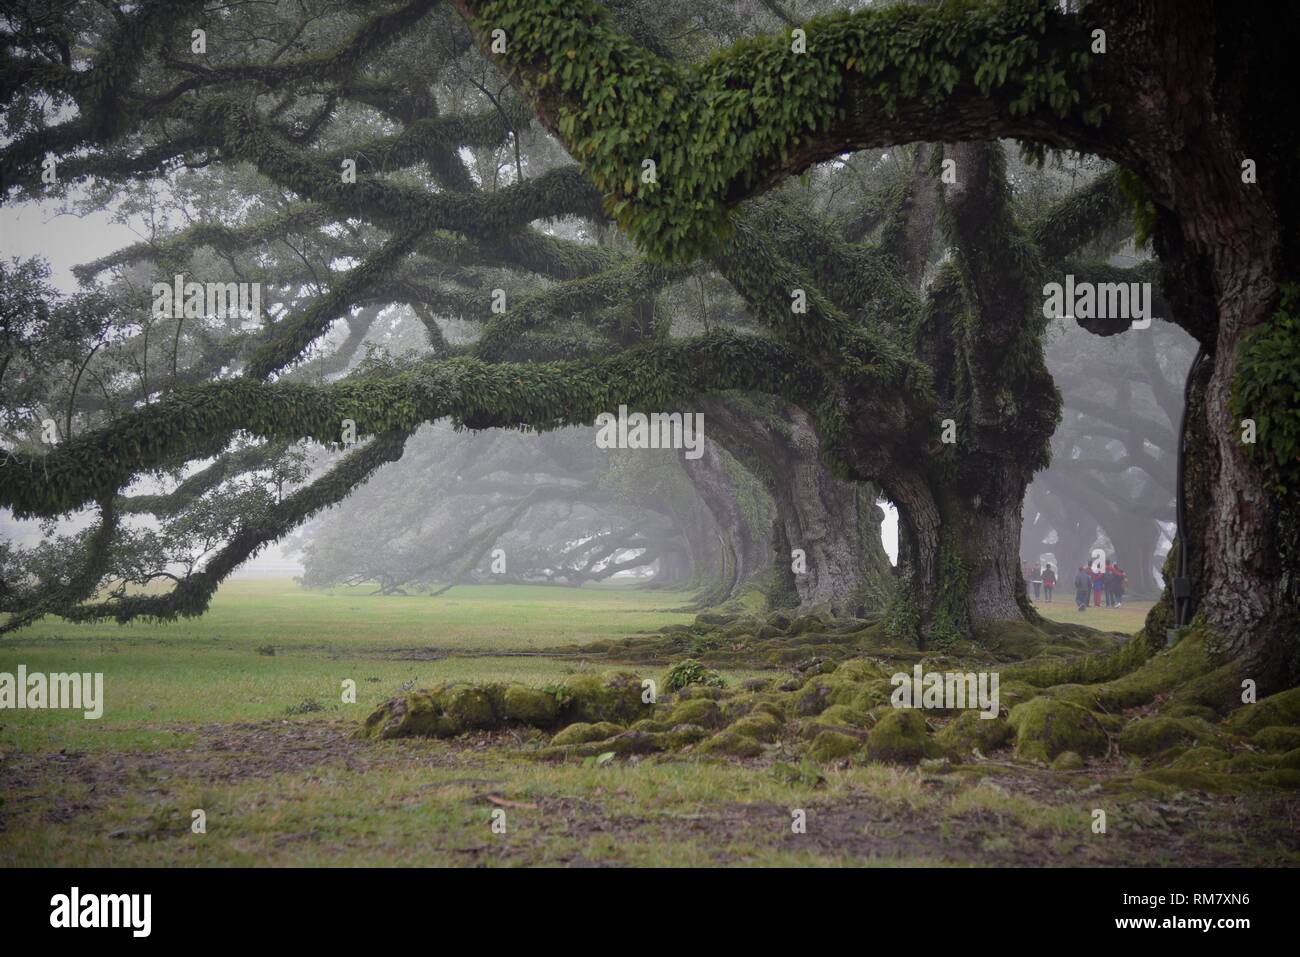 Old oak trees were covered with vines in dense fog. Oak Alley Plantation is a historic spot located on the west bank of the Mississippi River, U.S. Stock Photo